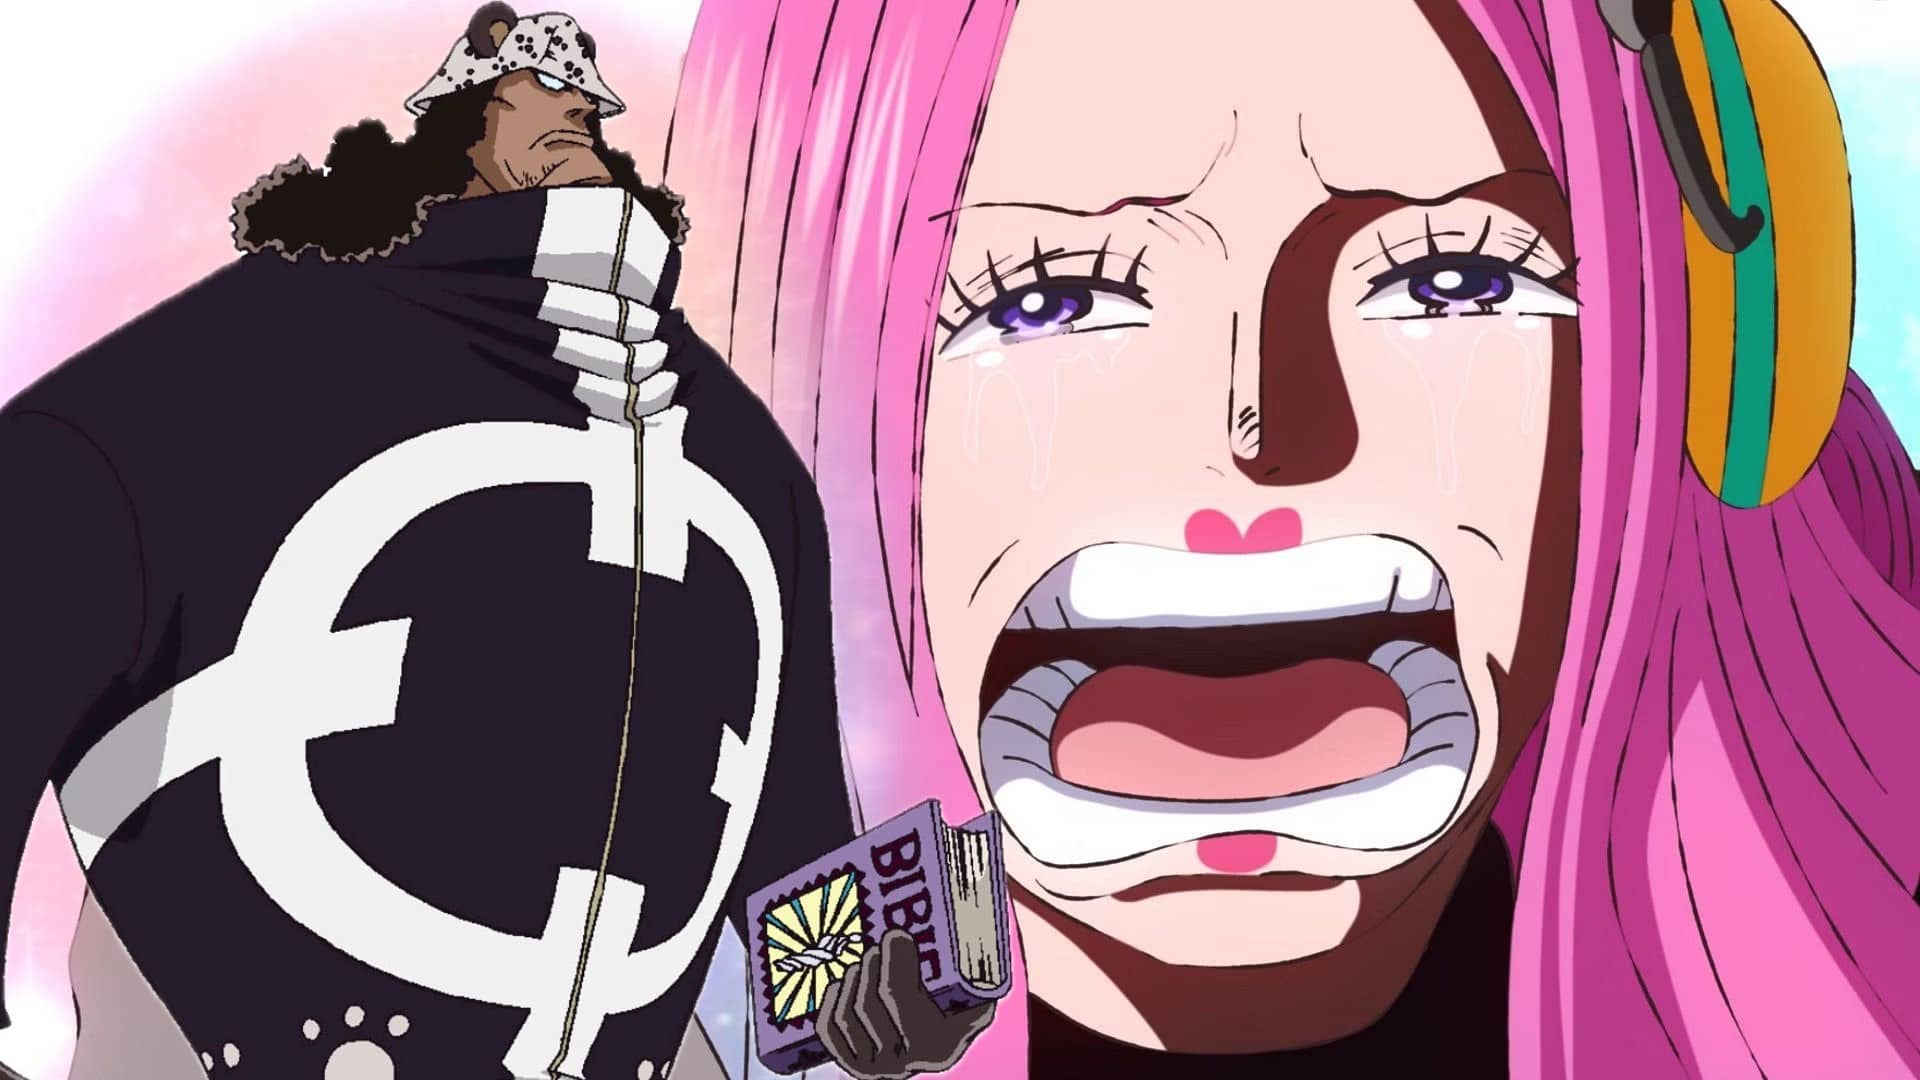 One Piece Manga Gets Emotional With Its Most Heartbreaking Cliffhanger Yet